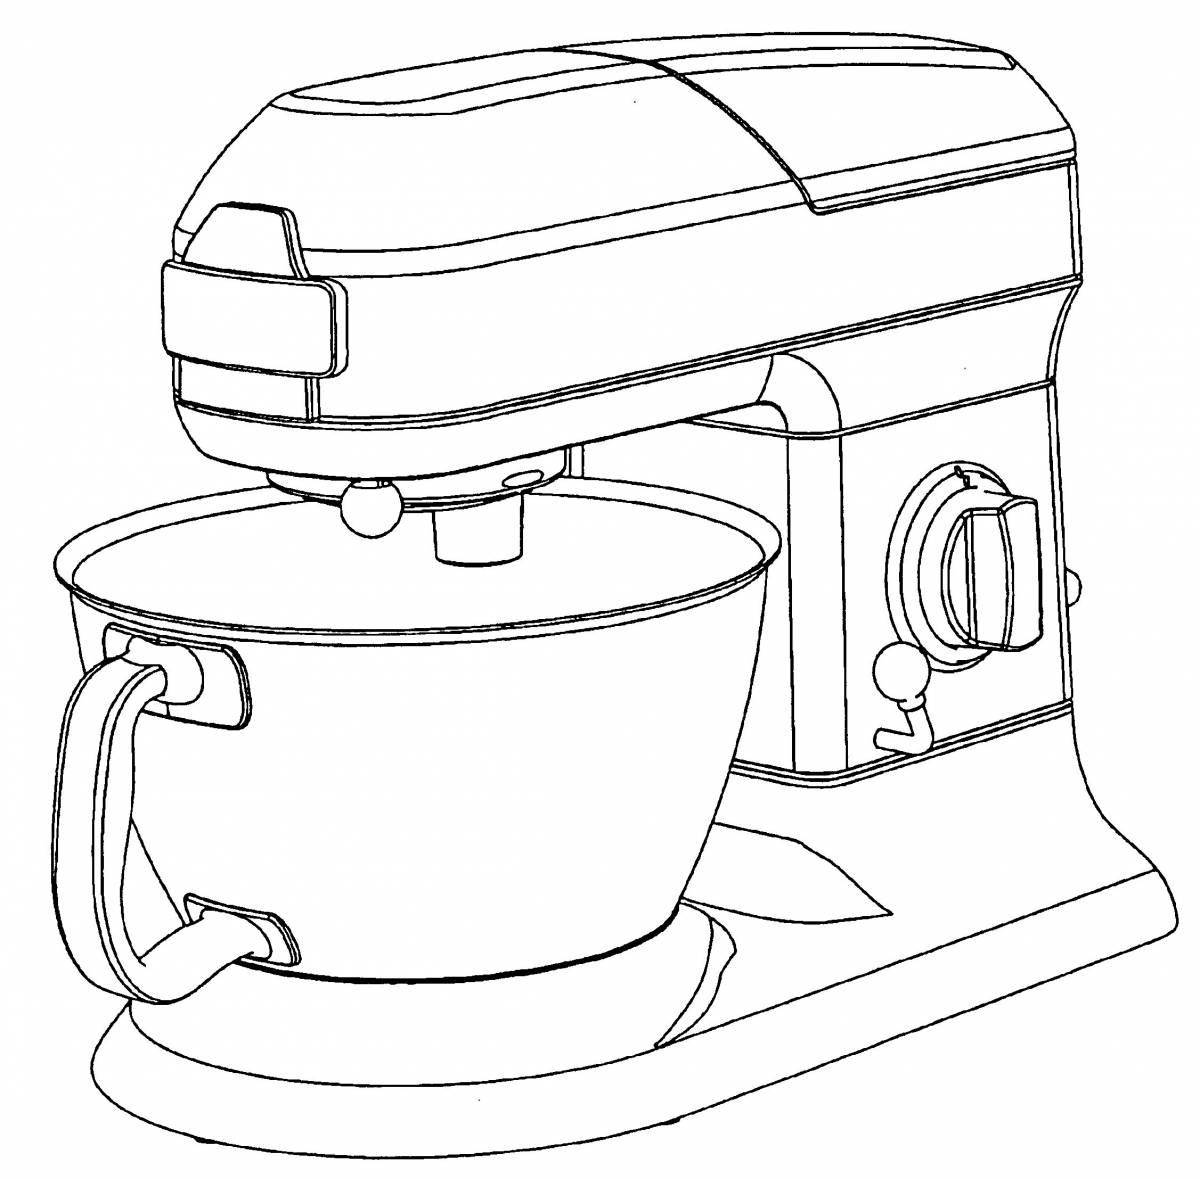 Colorful coloring pages of household appliances for kindergarten